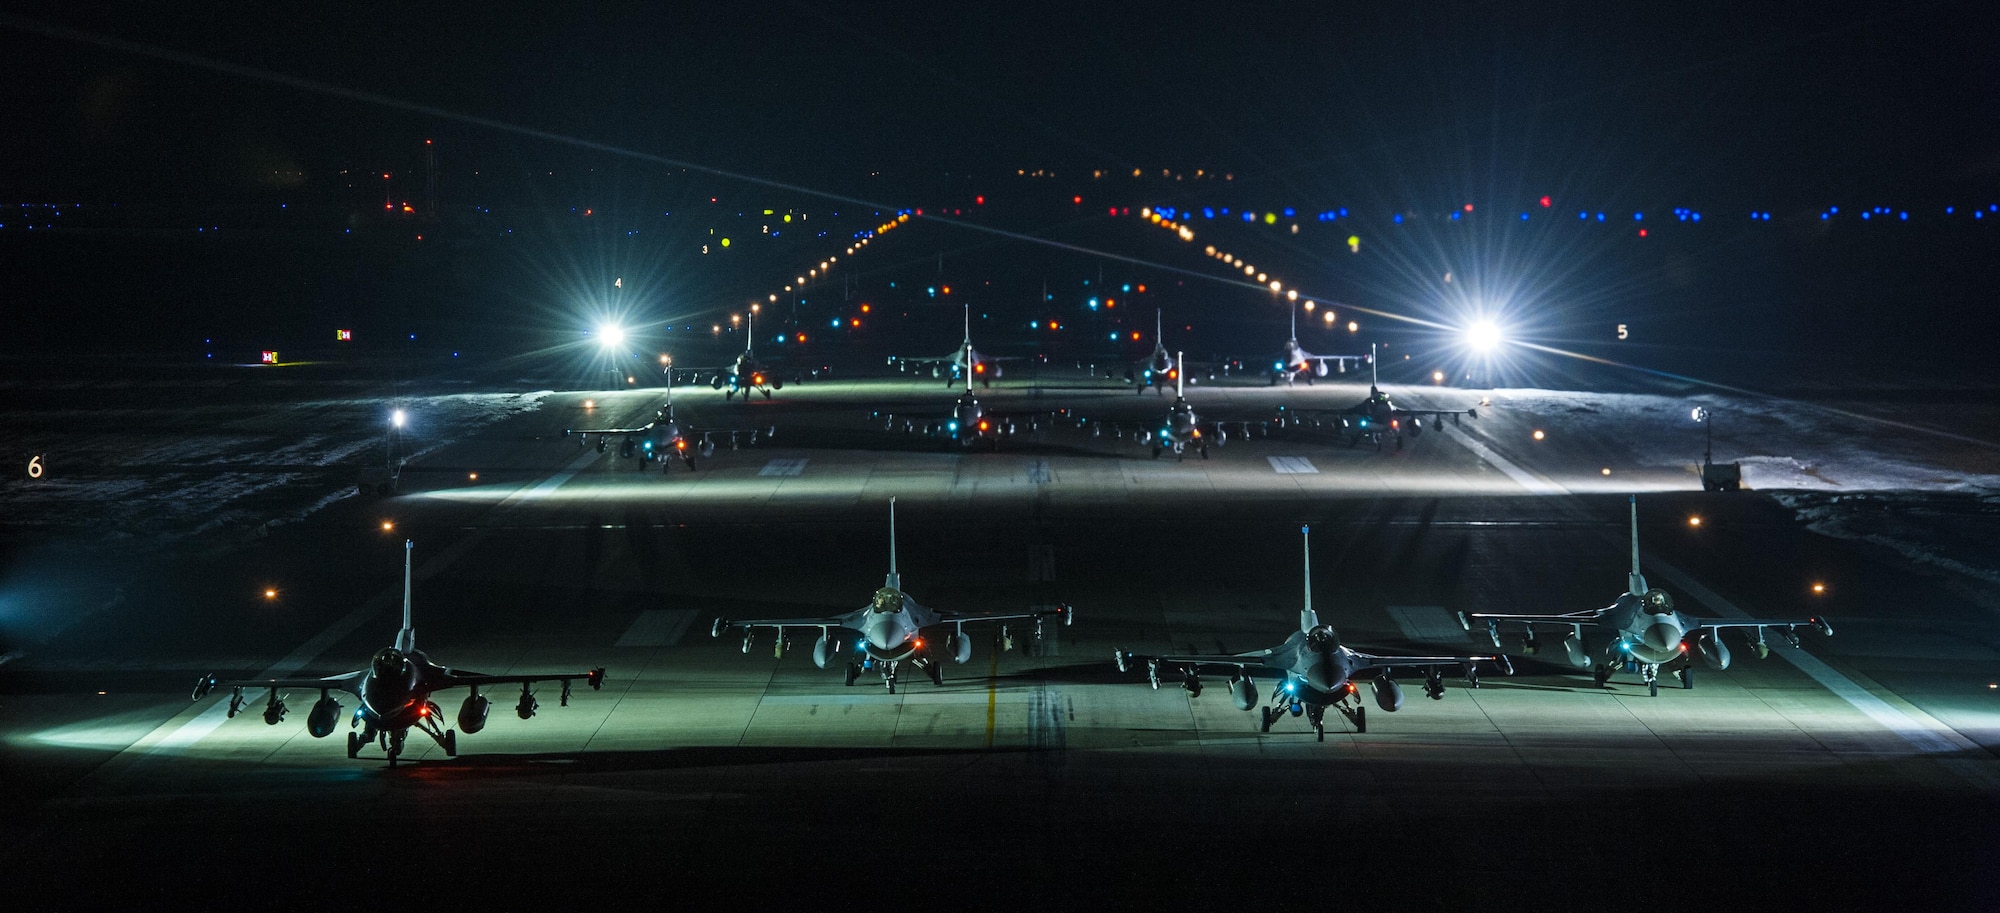 Twenty F-16s from the 8th Fighter Wing line up for an elephant walk early in the morning on Feb. 3, 2016 at Kunsan Air Base, Republic of Korea. The elephant walk was designed to test the 8 FW's ability to launch aircraft at a moment's notice. (U.S Air Force photo by Staff Sgt. Nick Wilson/Released)